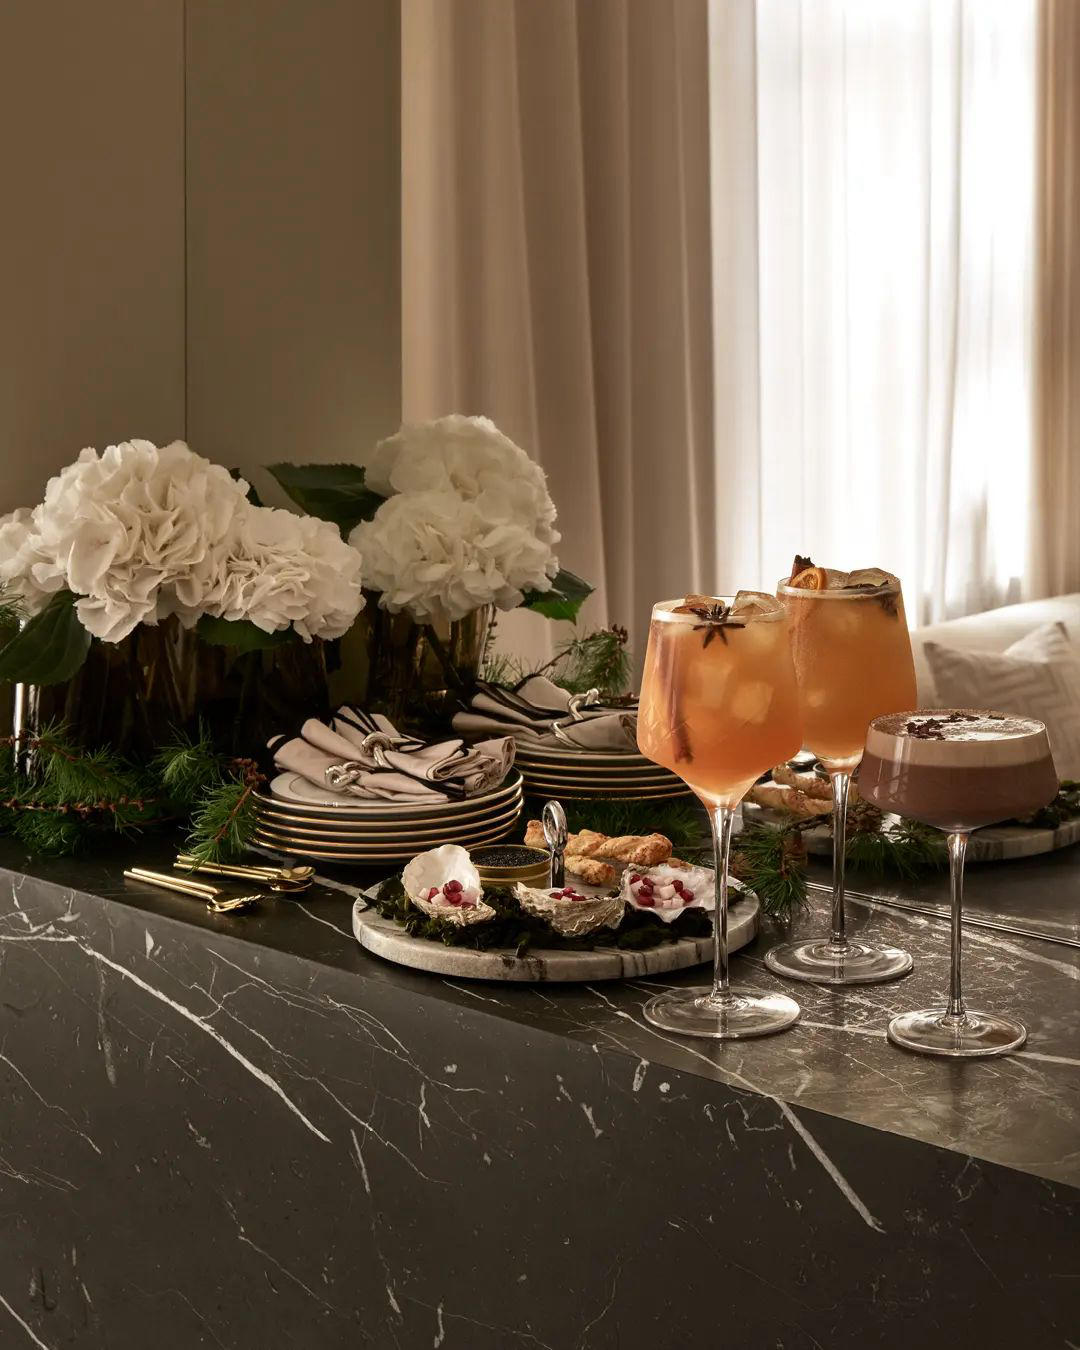 H&M HOME - Those winter cocktails looks amazing